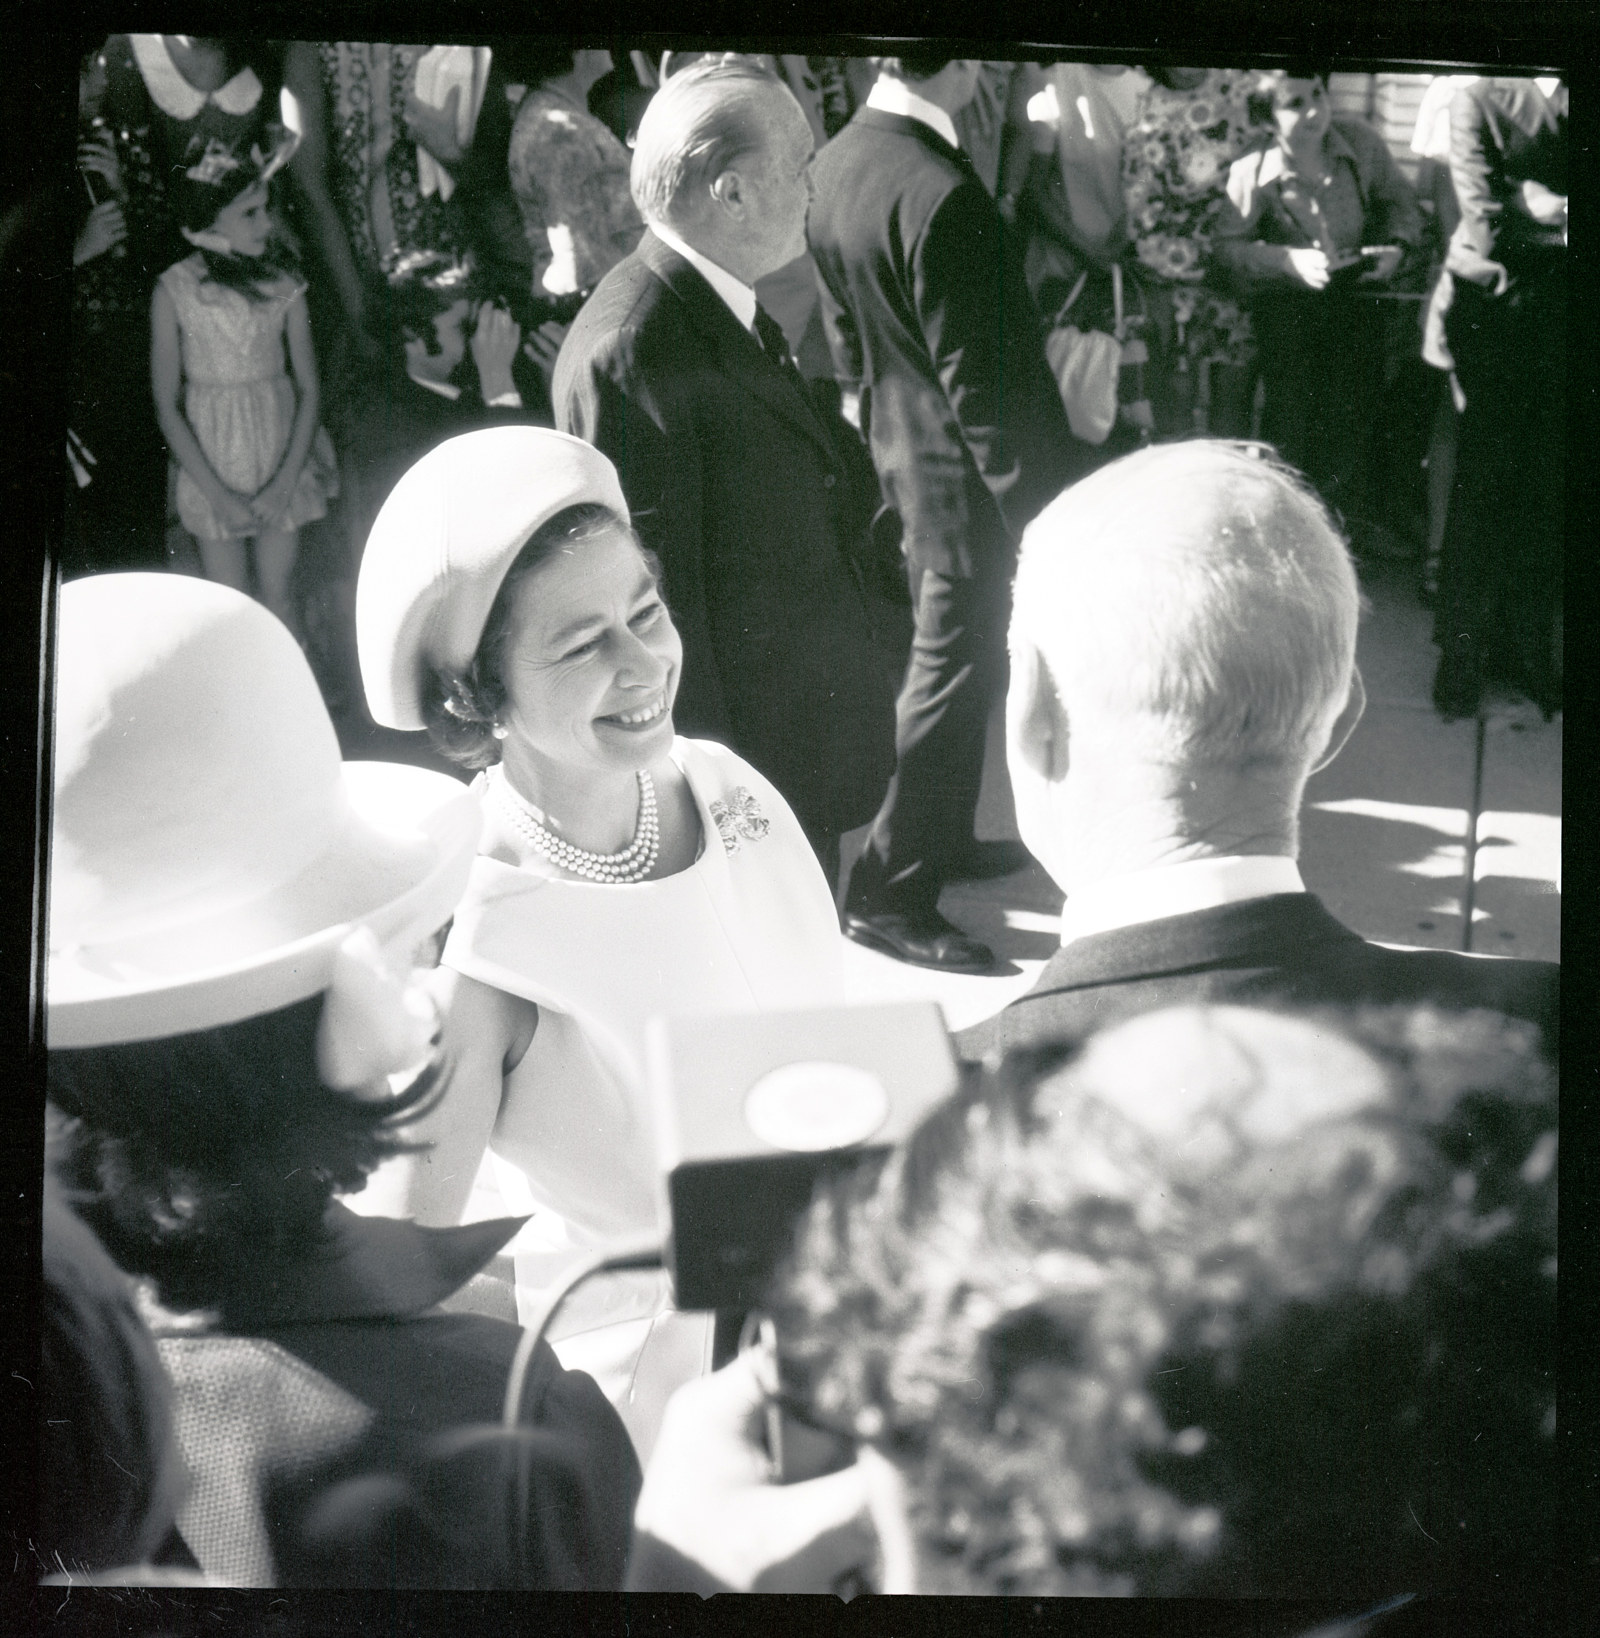 HM the Queen meeting VIPs and members of the public at the Opera House’s official opening. October 20th 1973.